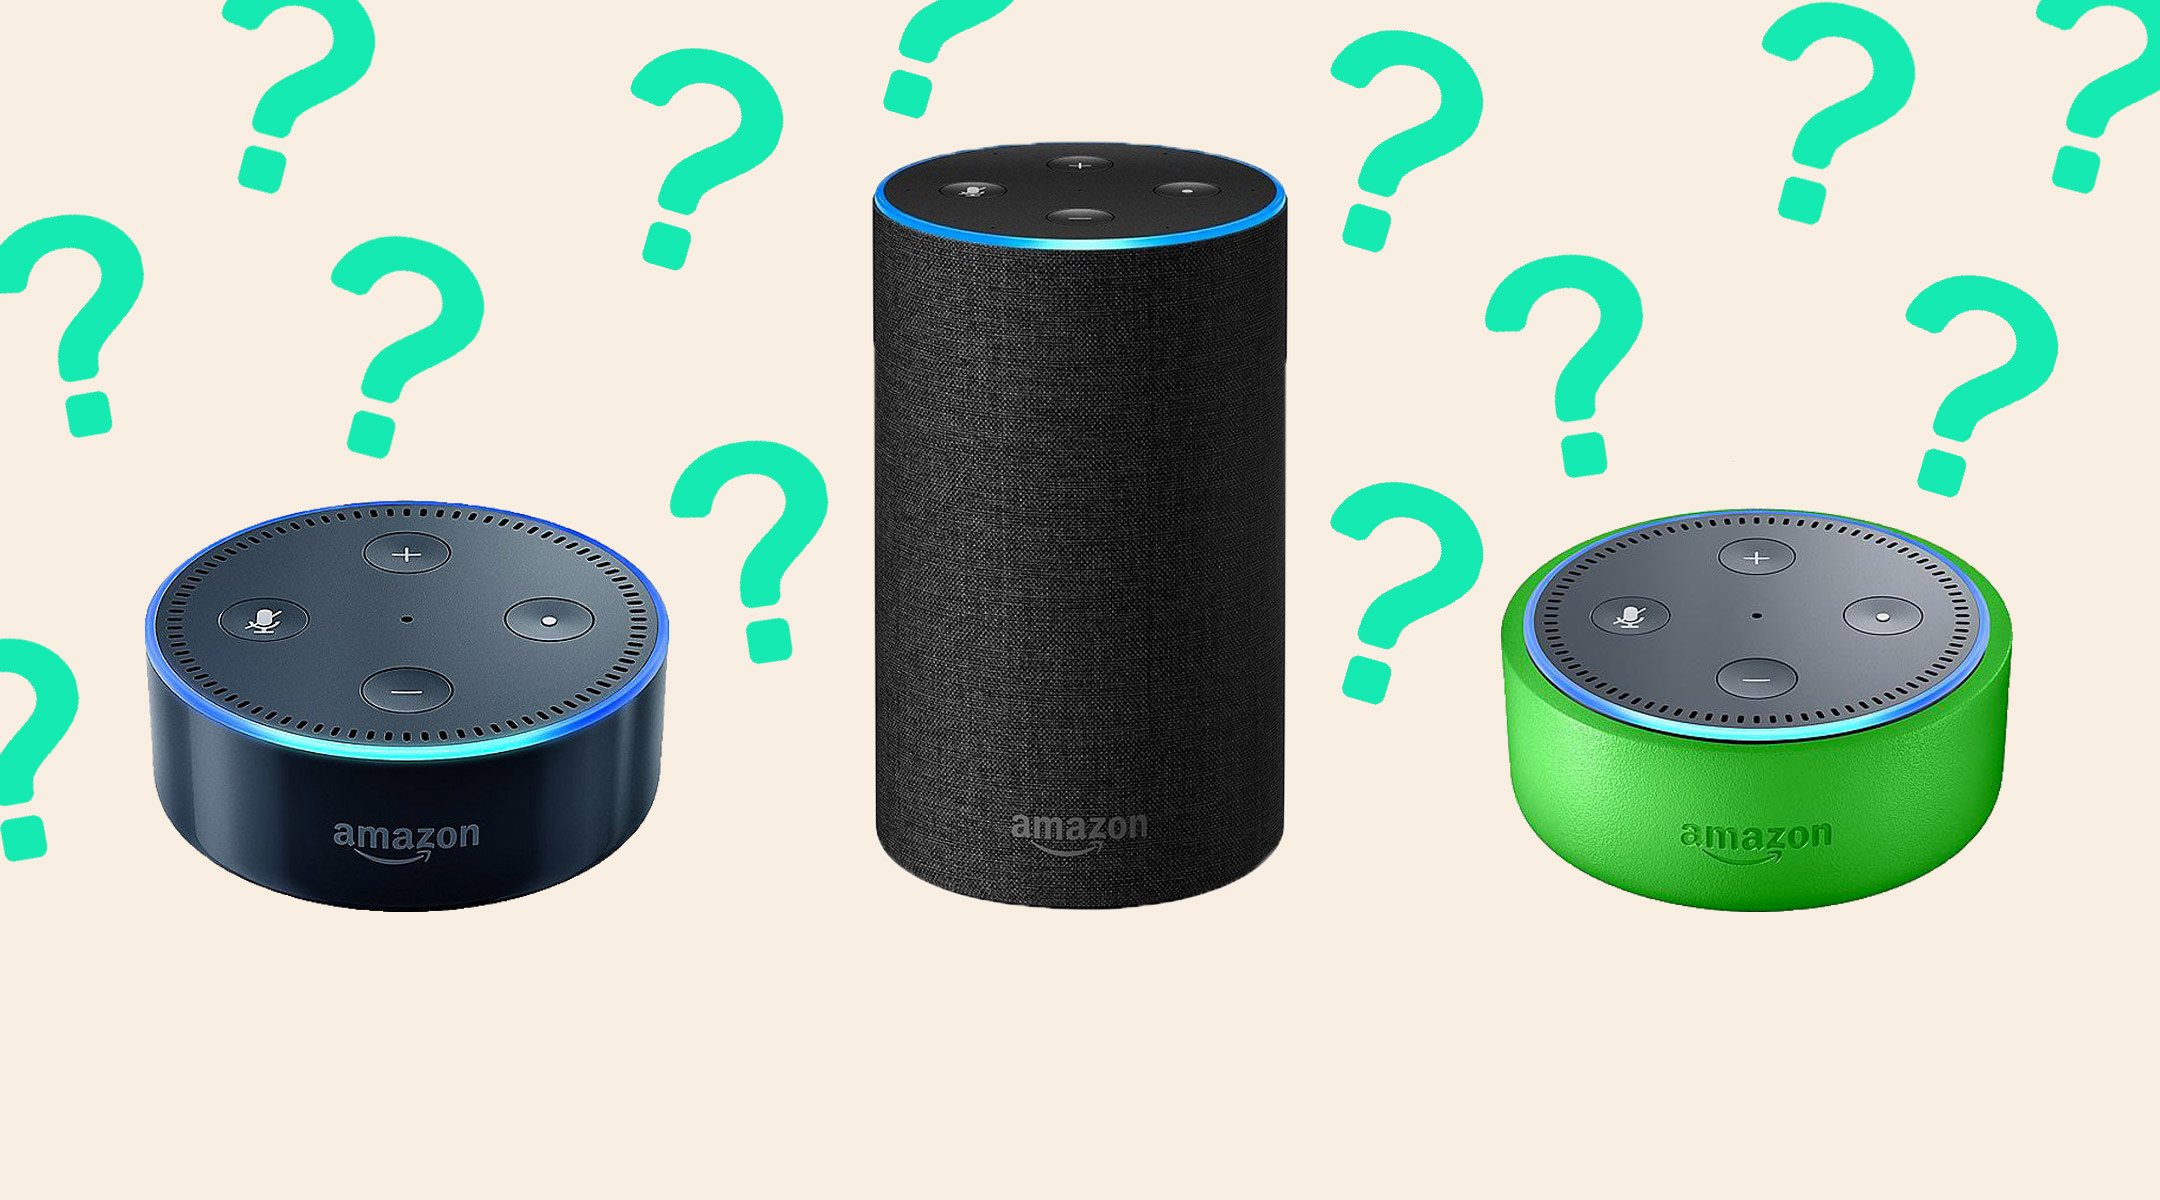 amazon alexa programmed to reply to kids questions